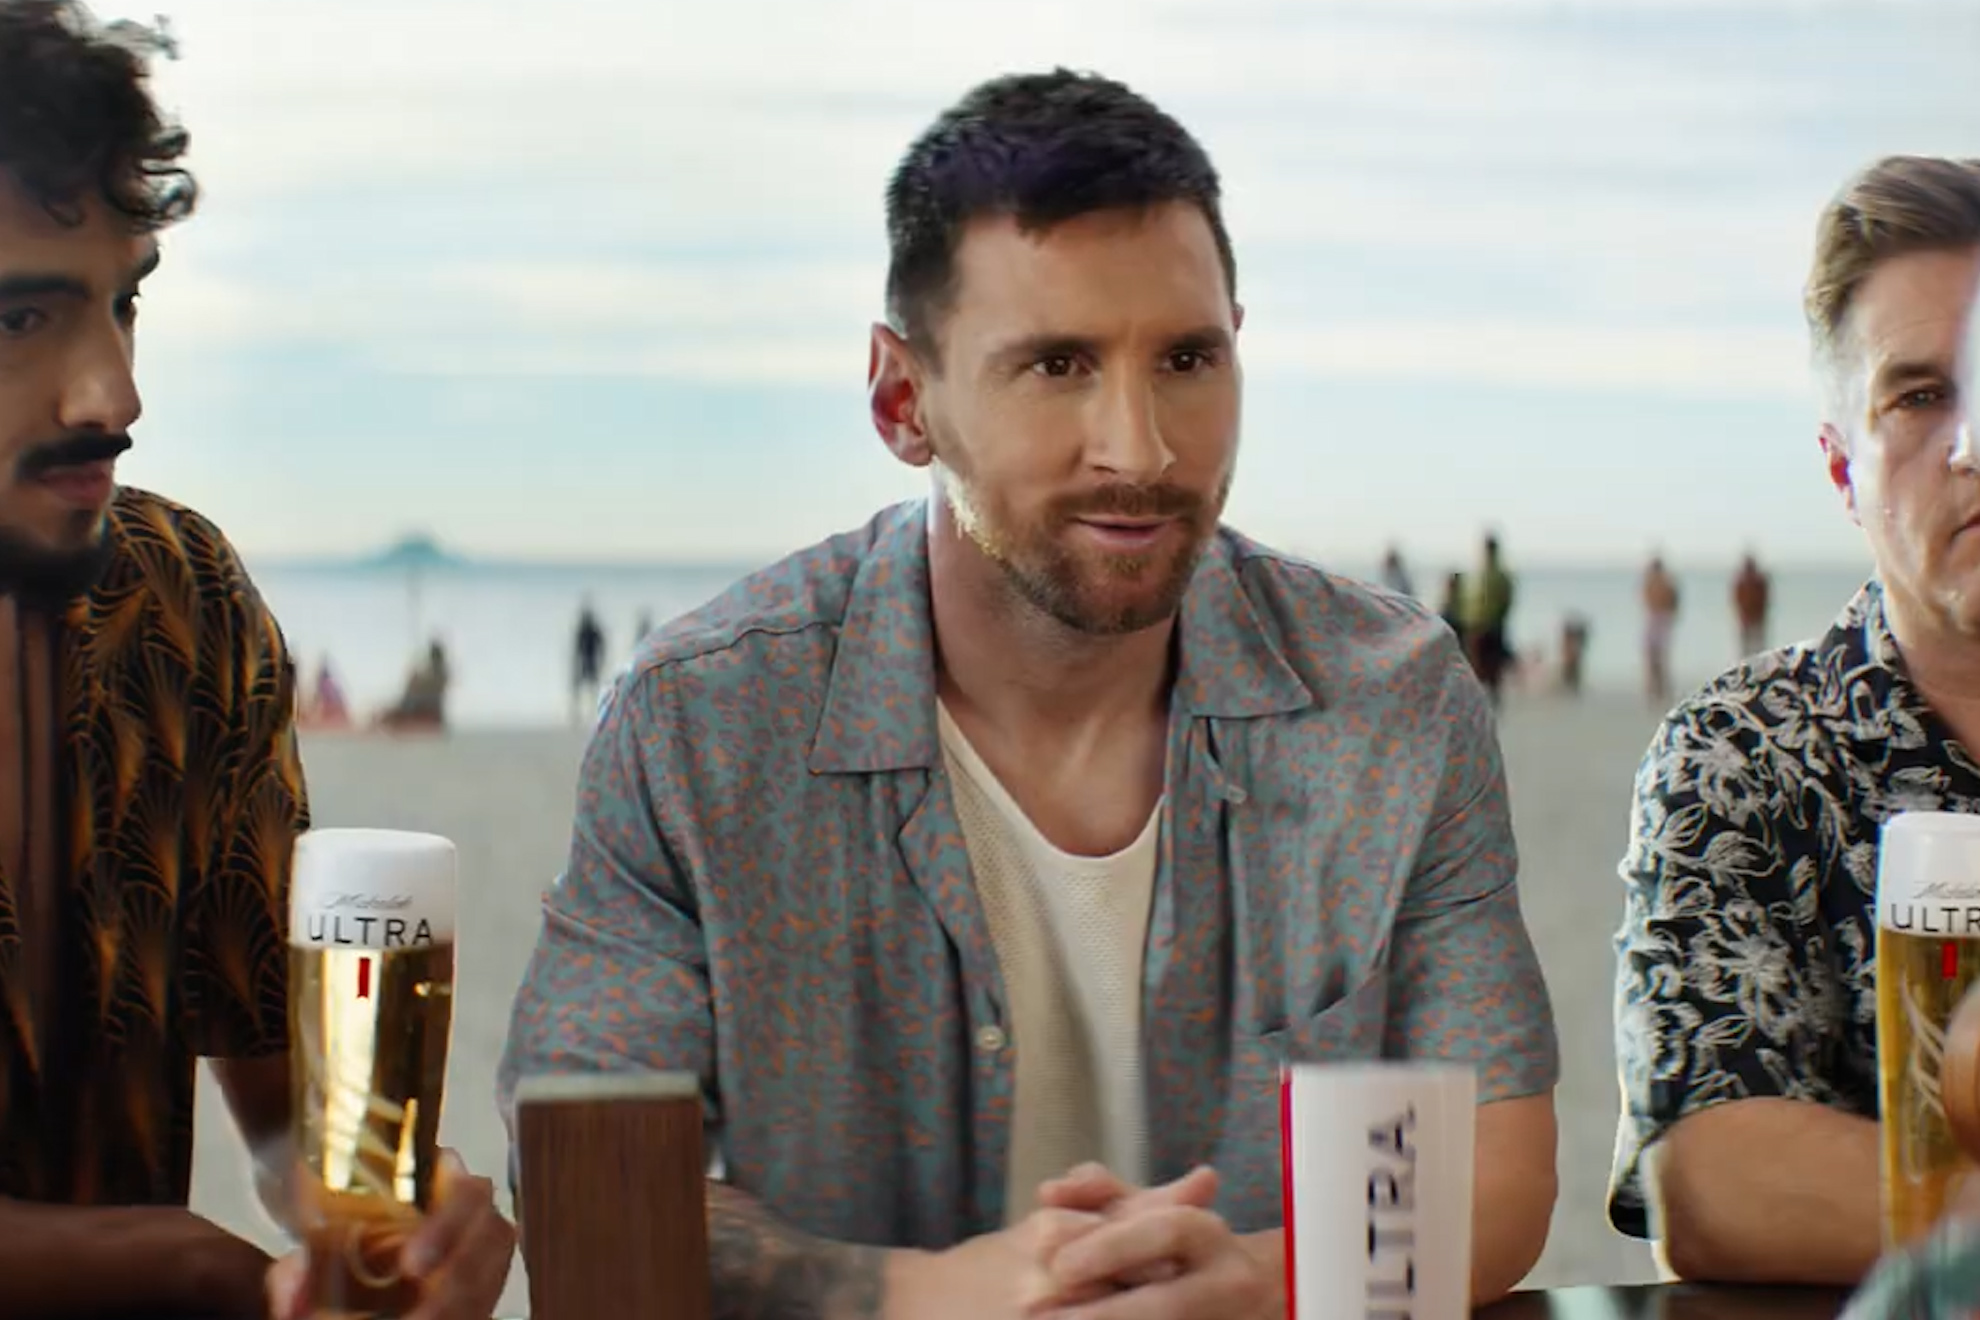 Watch Lionel Messi Super Bowl XLIII ad for Michelob Ultra with costs  surpassing $14 Million | Marca